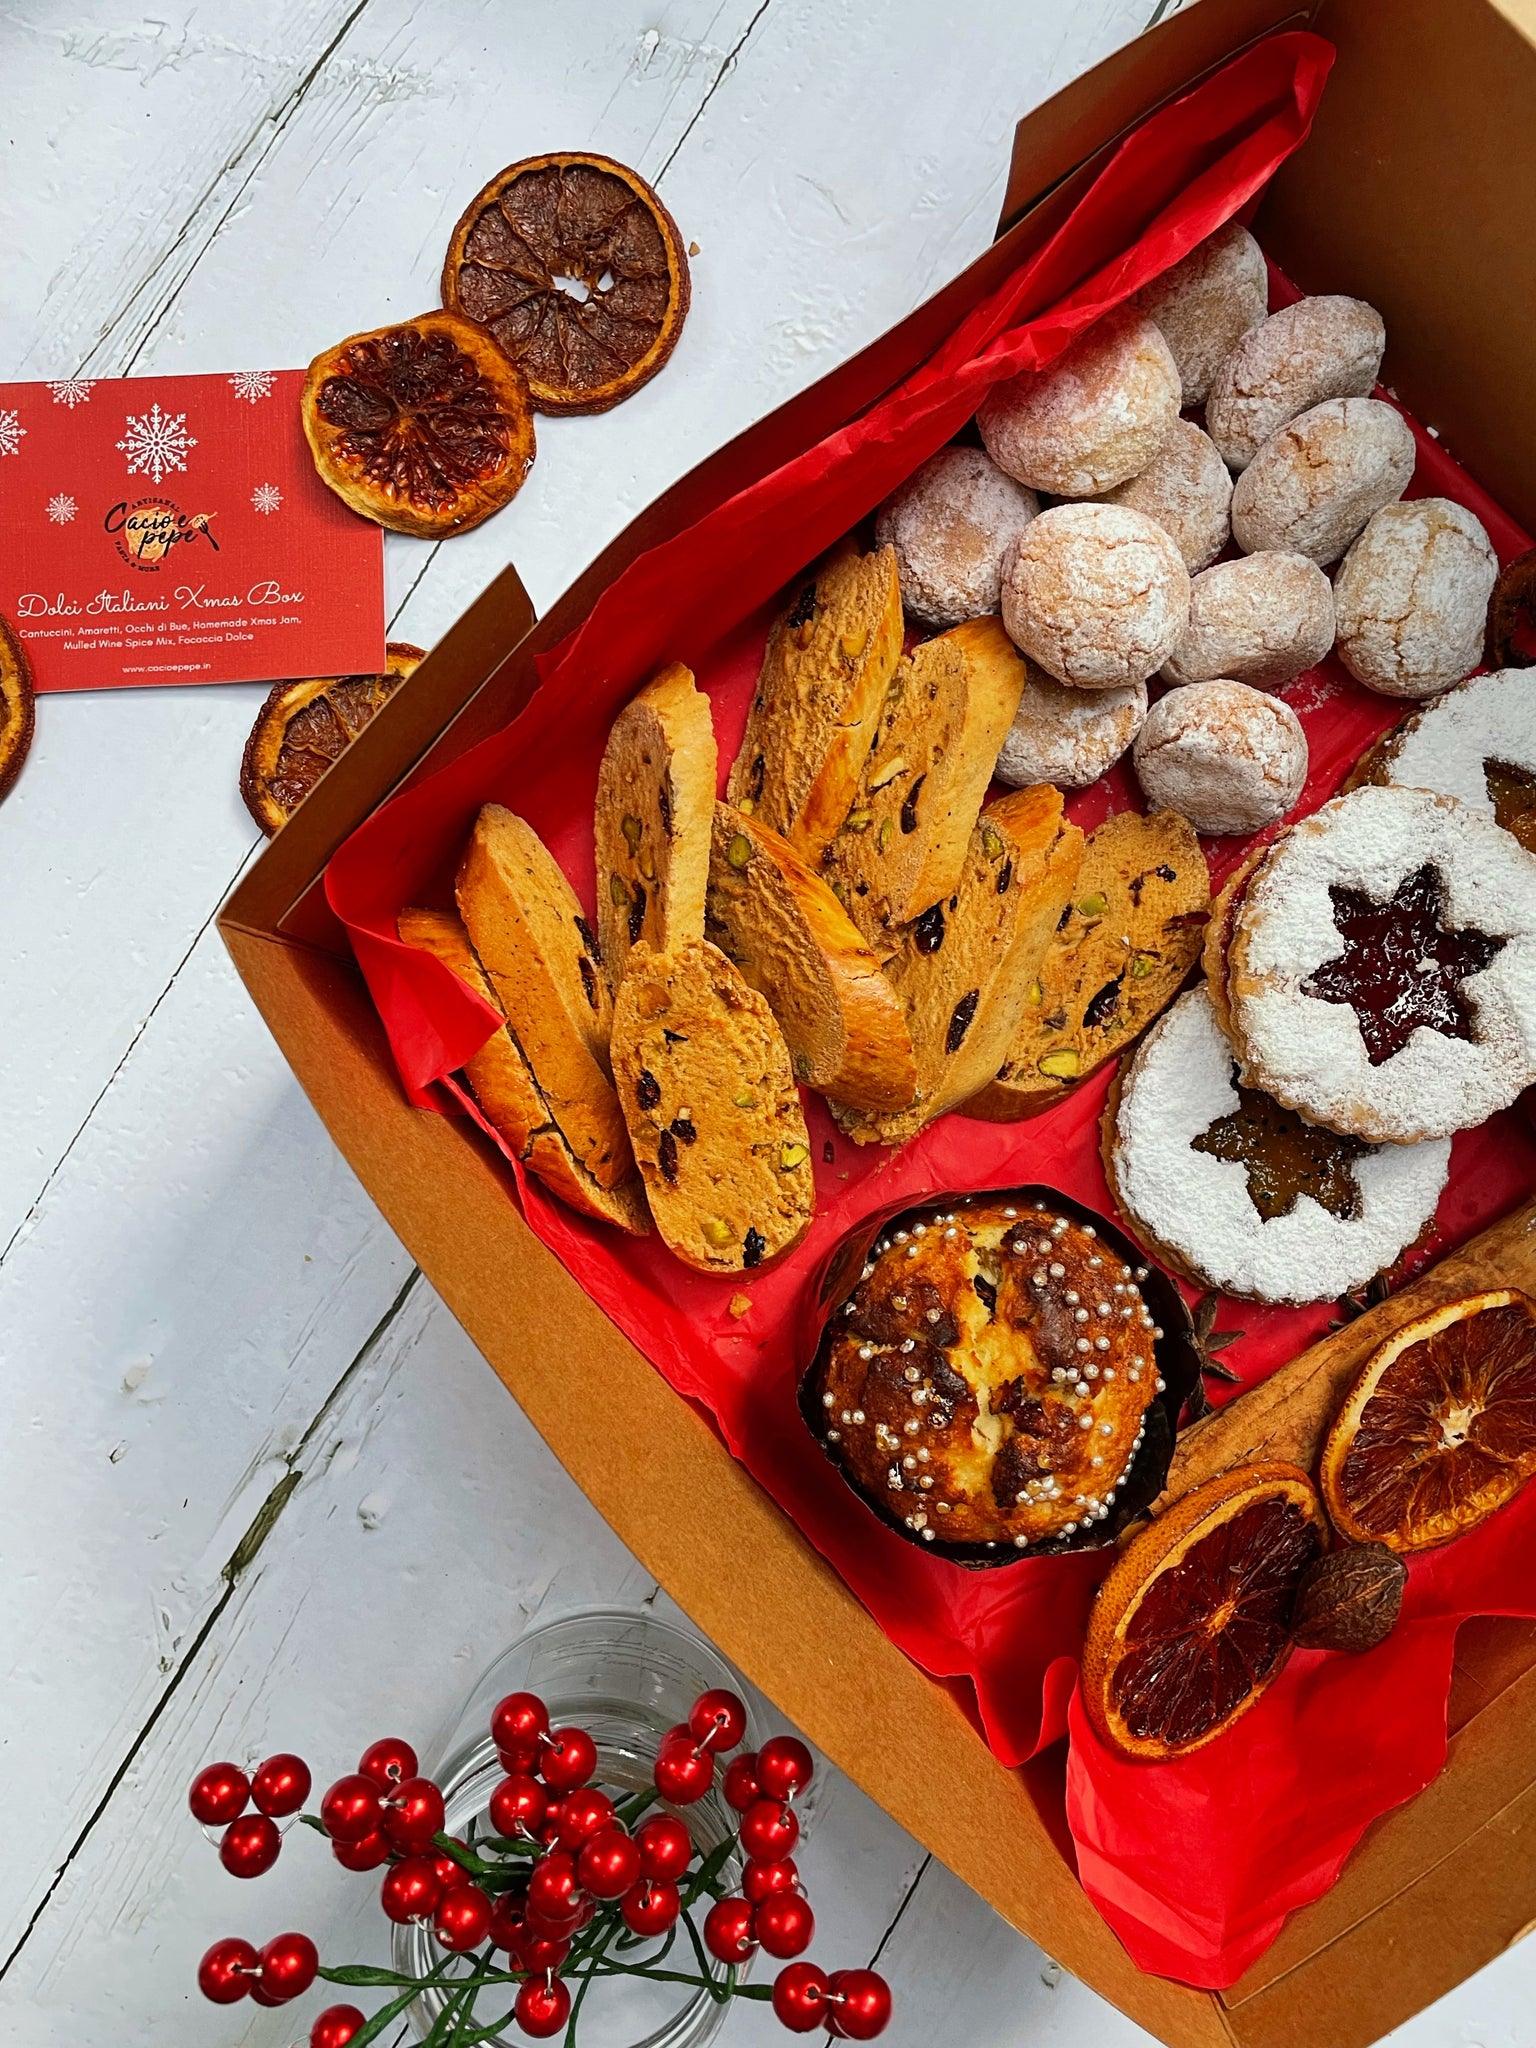 Dolci Italiani Xmas Box (Pre-Orders Only- Available 13th-25th December)